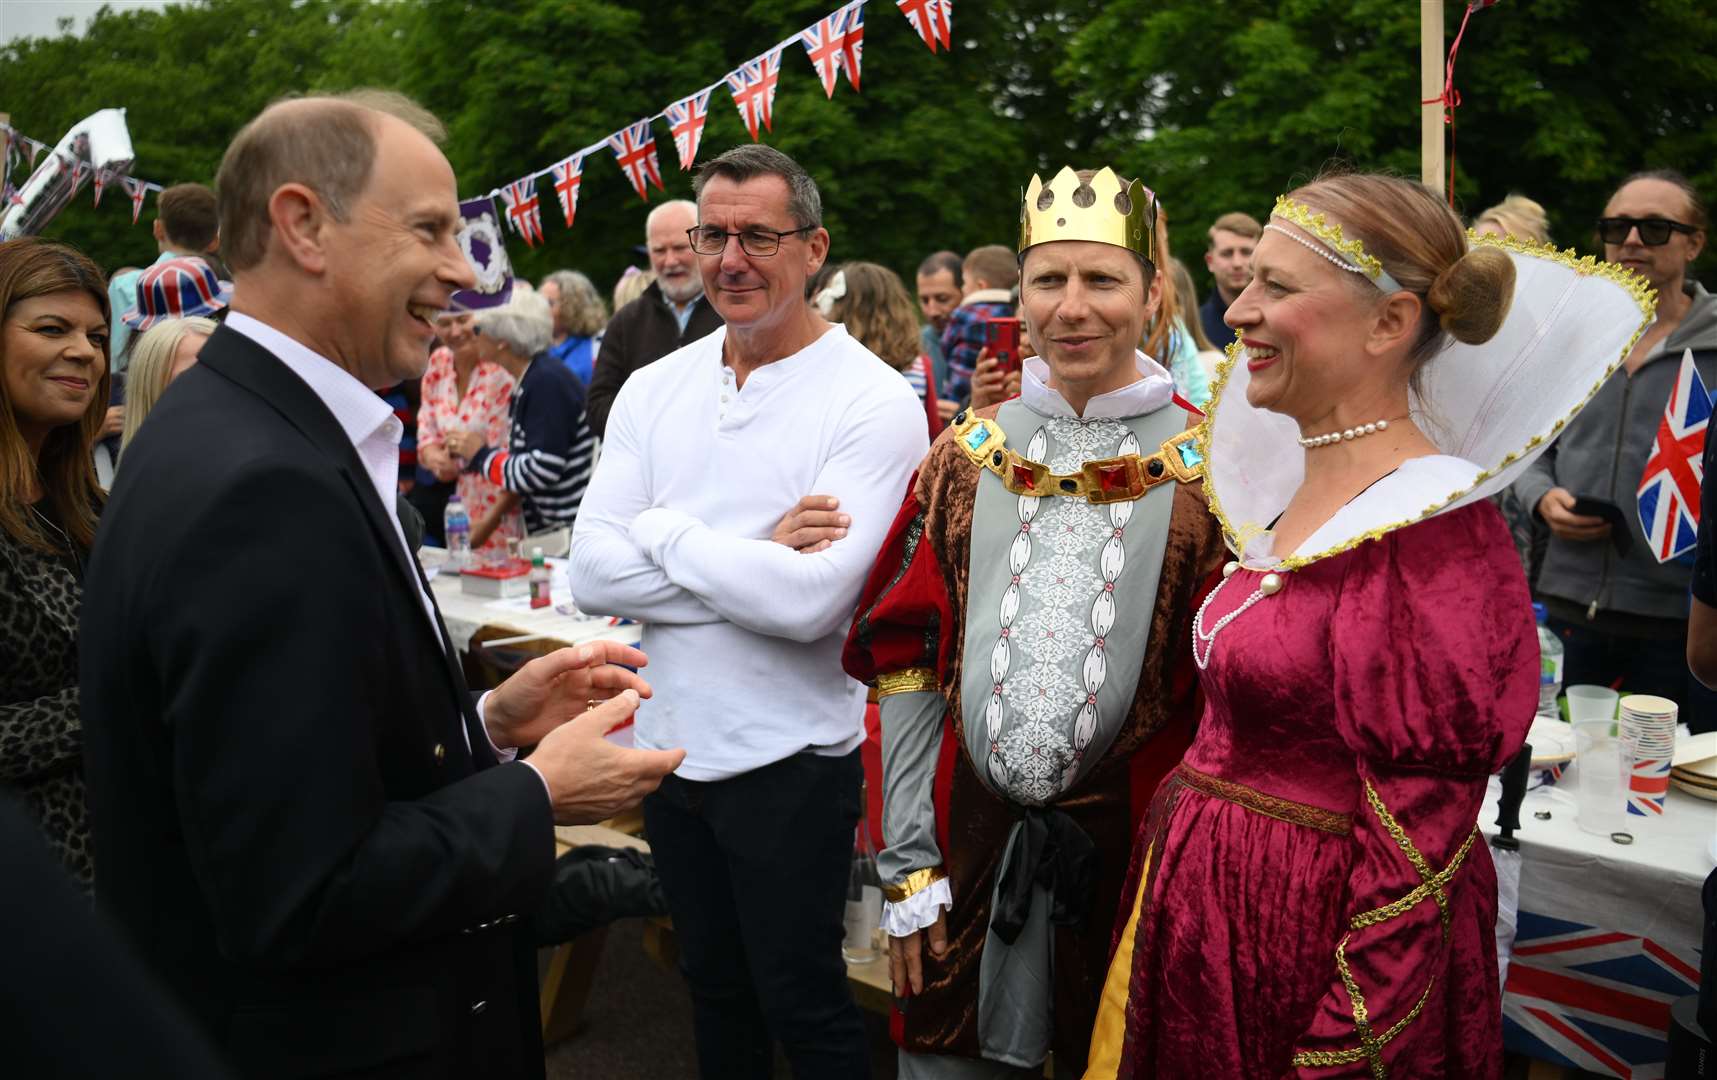 The Earl of Wessex during the Big Jubilee Lunch with members of the local community (Daniel Leal/PA)